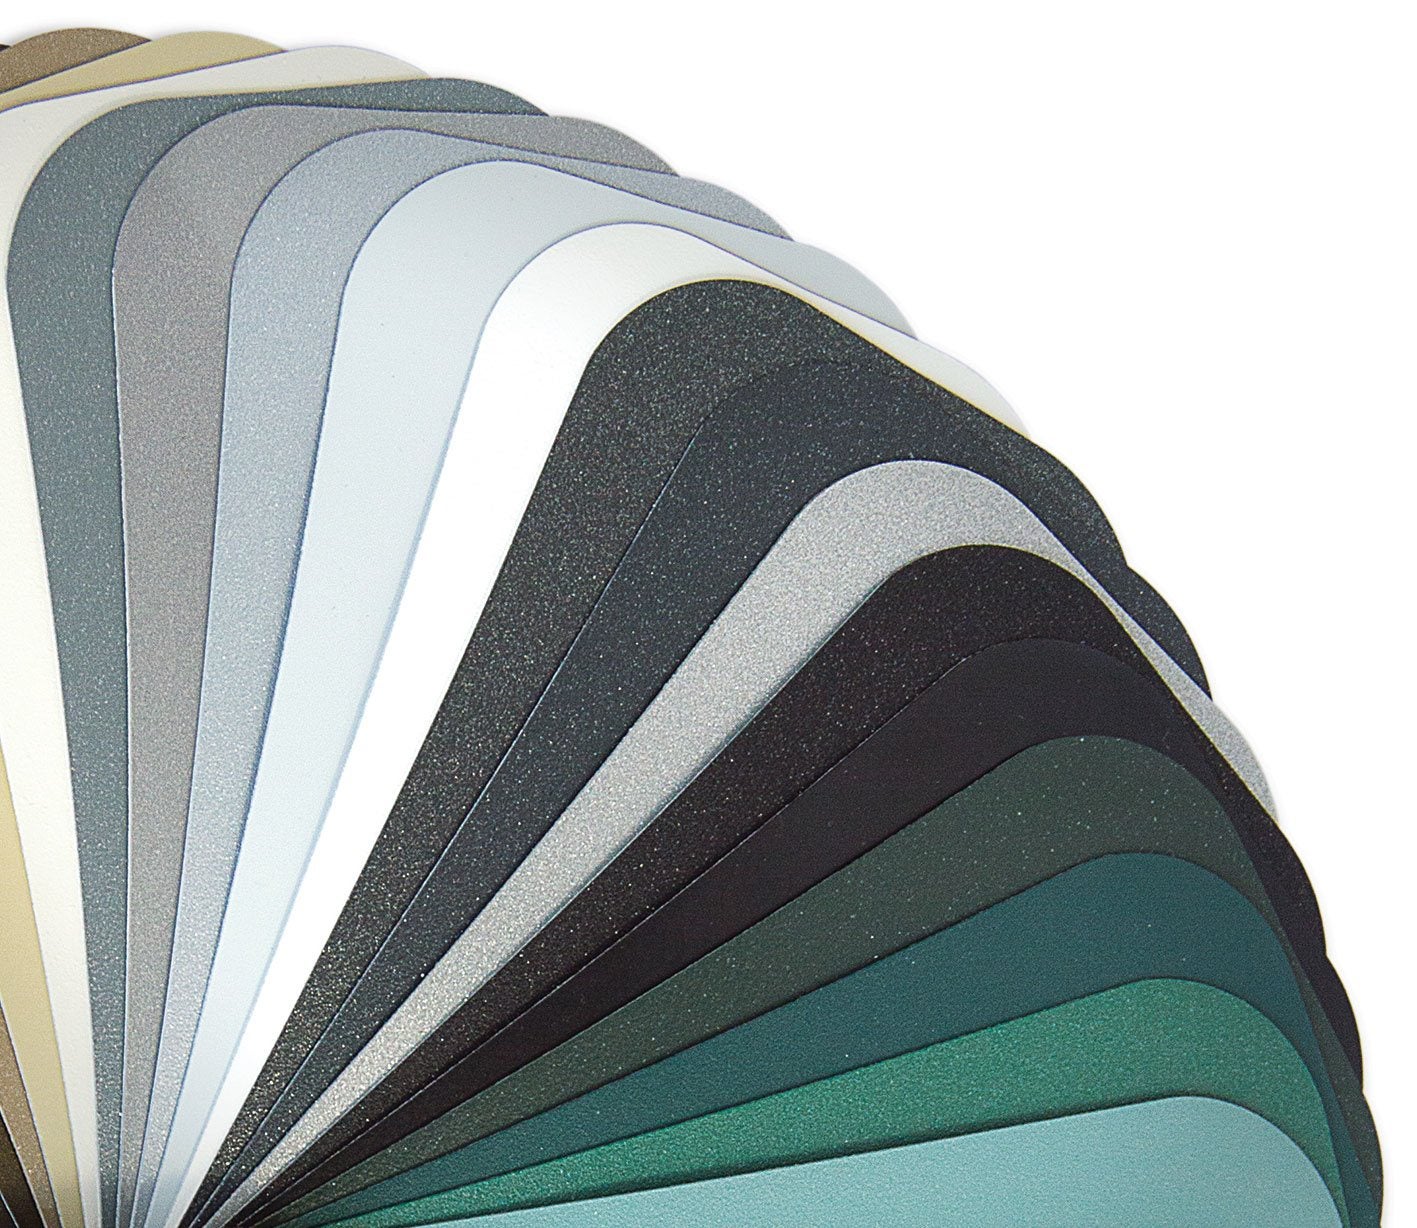 PPG architectural powder coatings color collection swatches